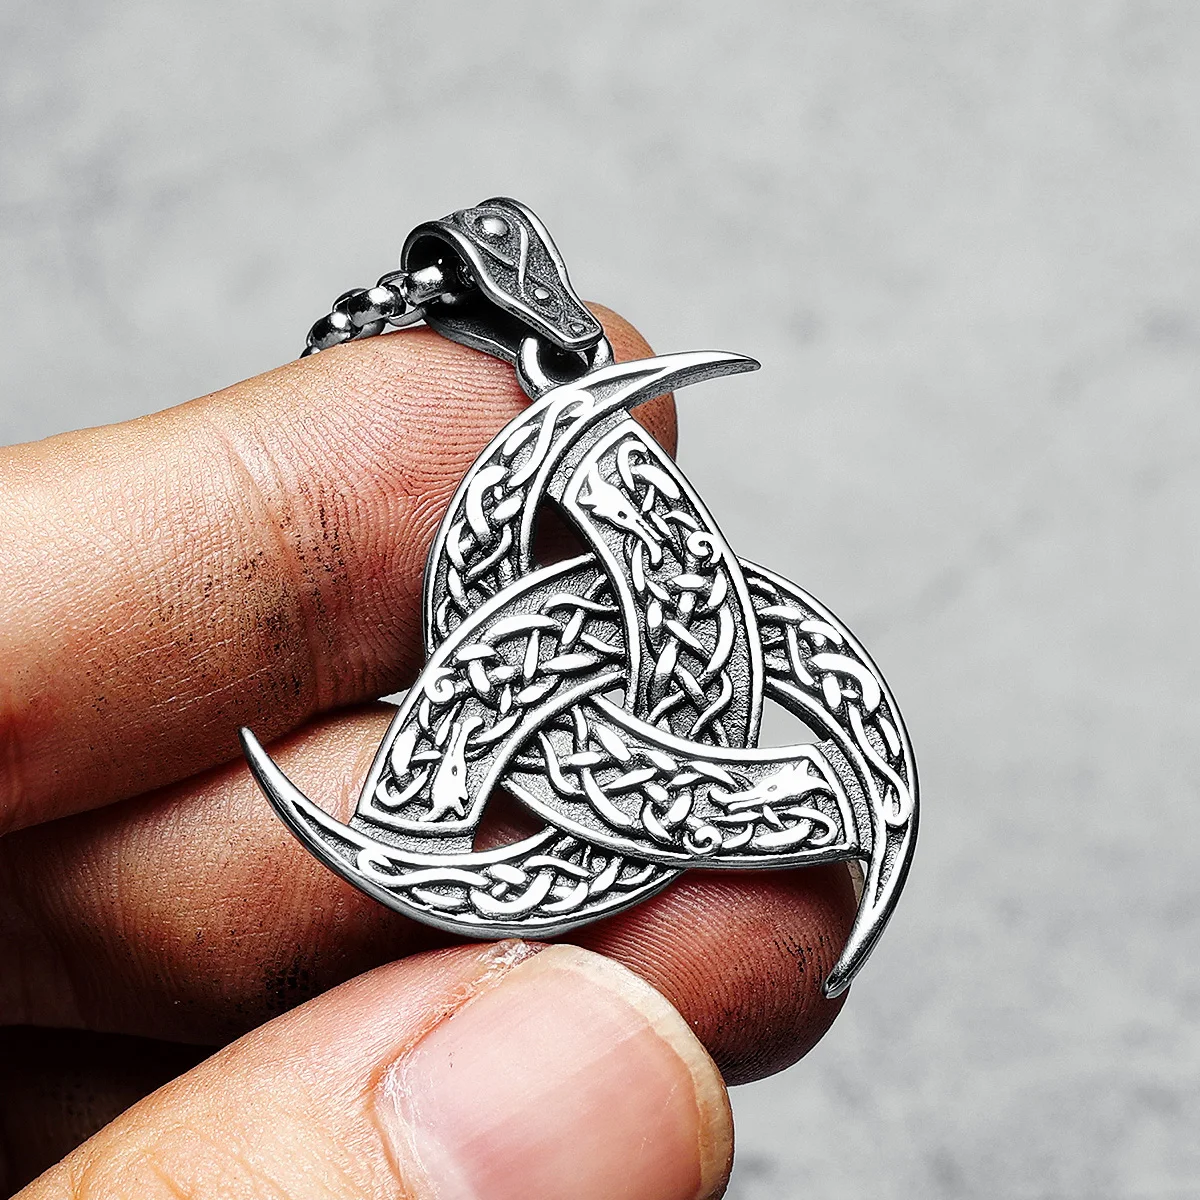 Viking Knot Men Necklaces 316L Stainless Steel Nordic Mythology Retro Pendant Chain Punk Rock for Friend Male Jewelry Best Gift